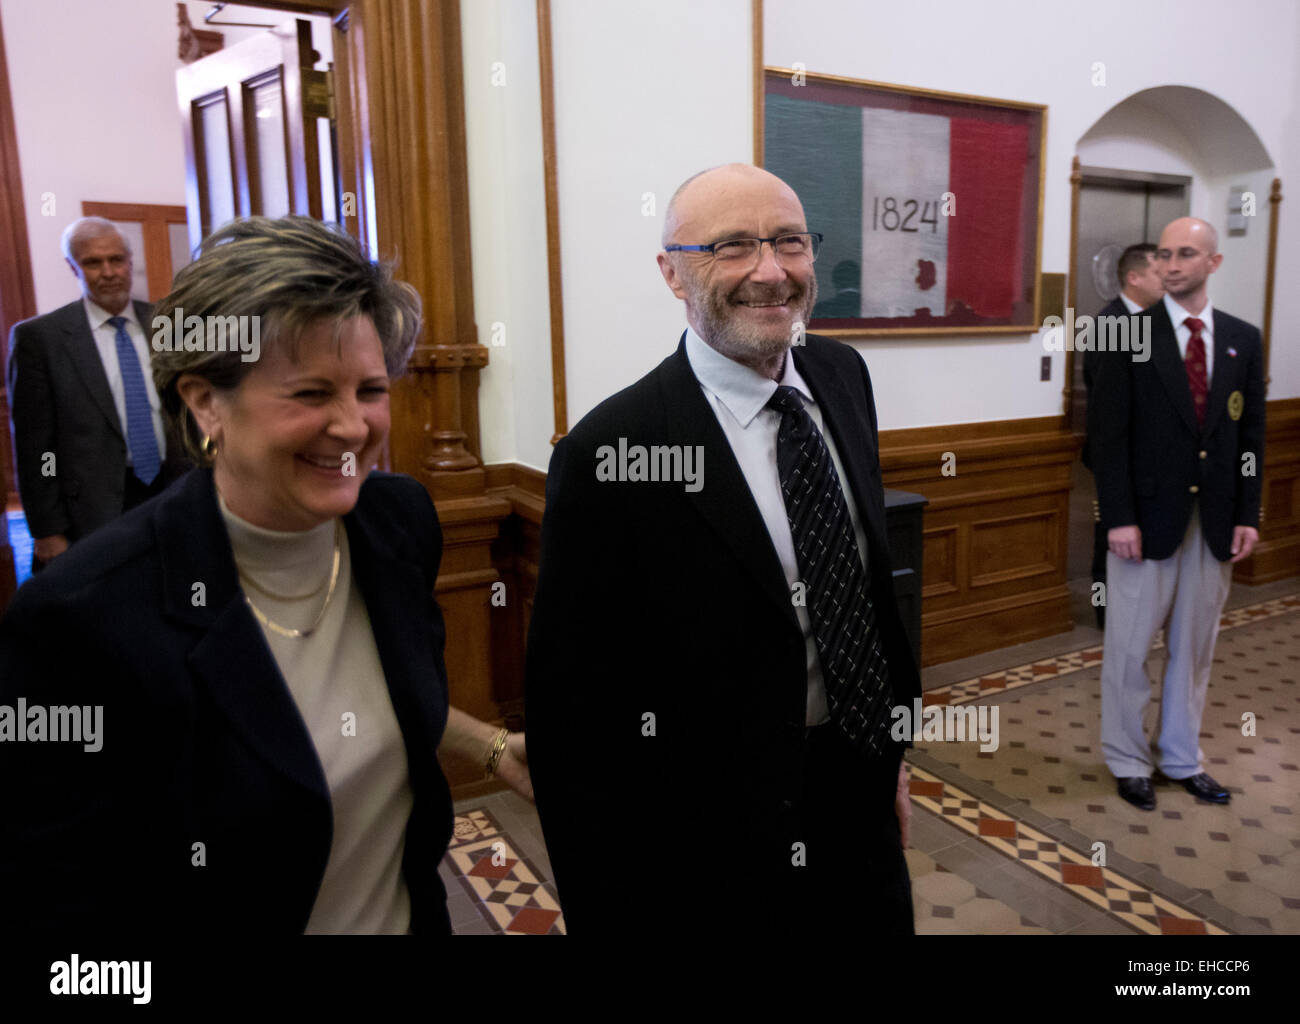 British pop singer Phil Collins with Alamo director after he accepted title of Honorary Texan from the Texas Legislature Stock Photo